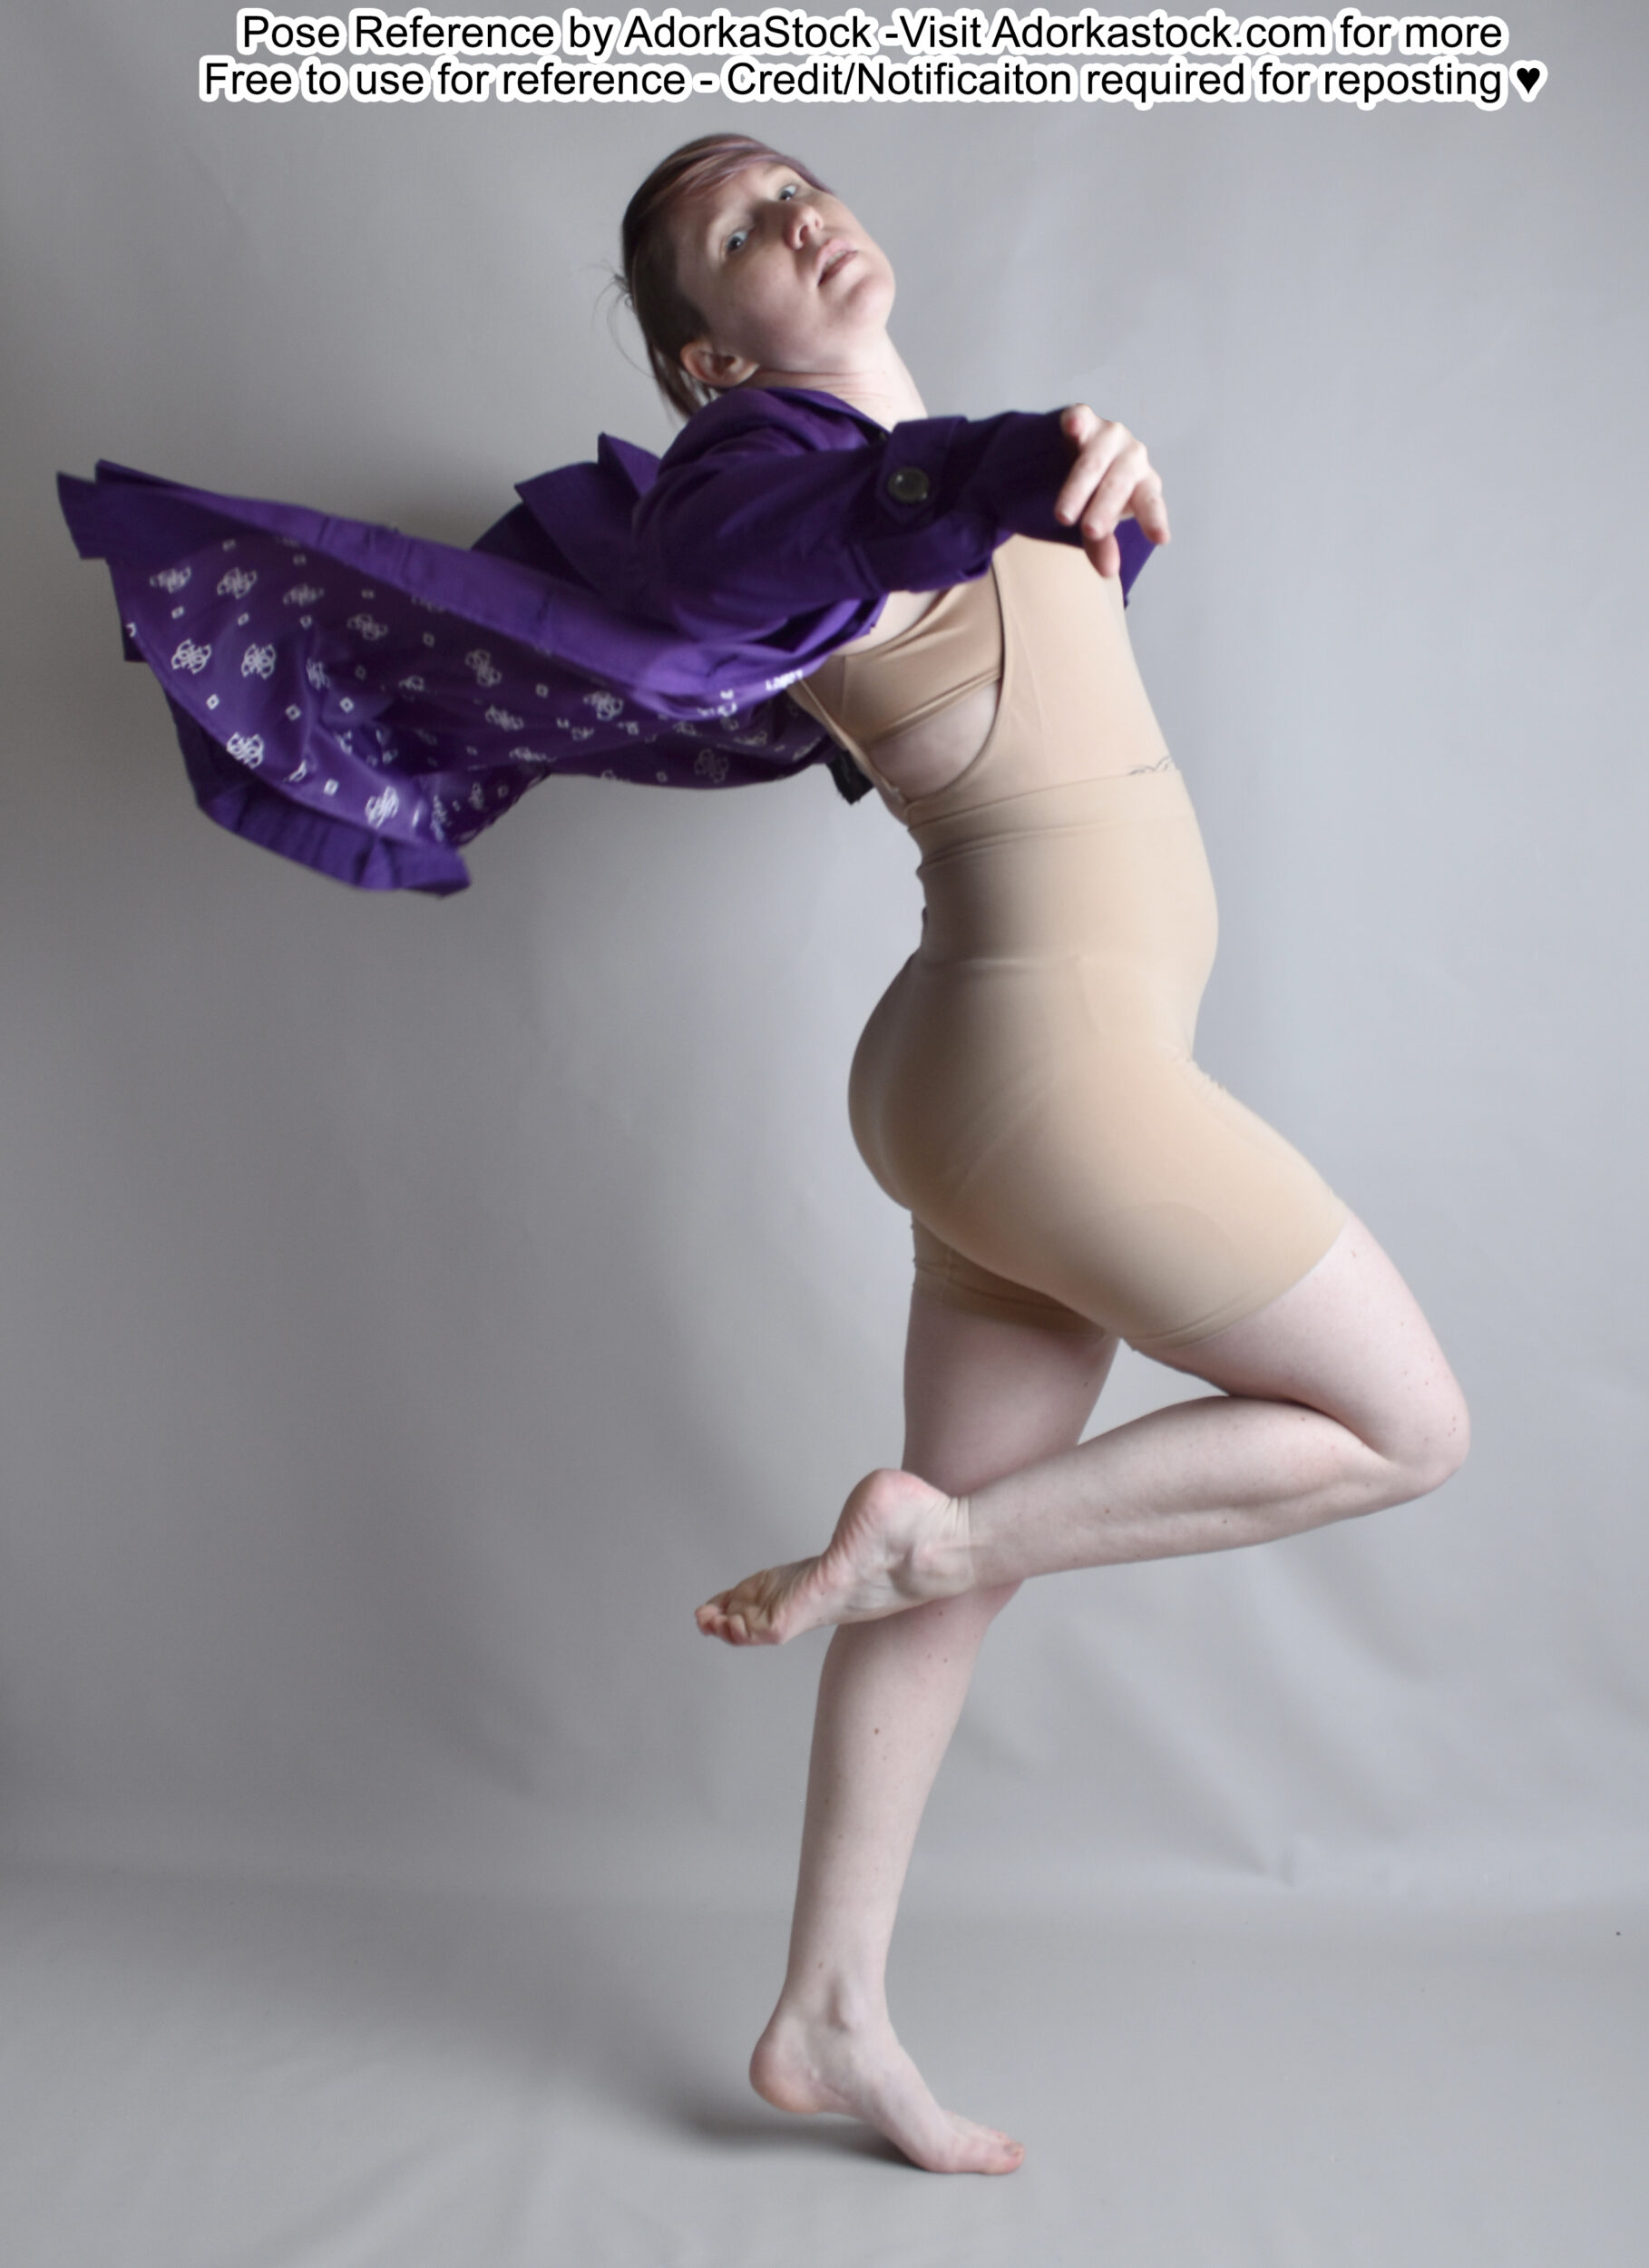 thin, white, female pose reference model in dynamic turning pose with coat flaring out, one leg lifted